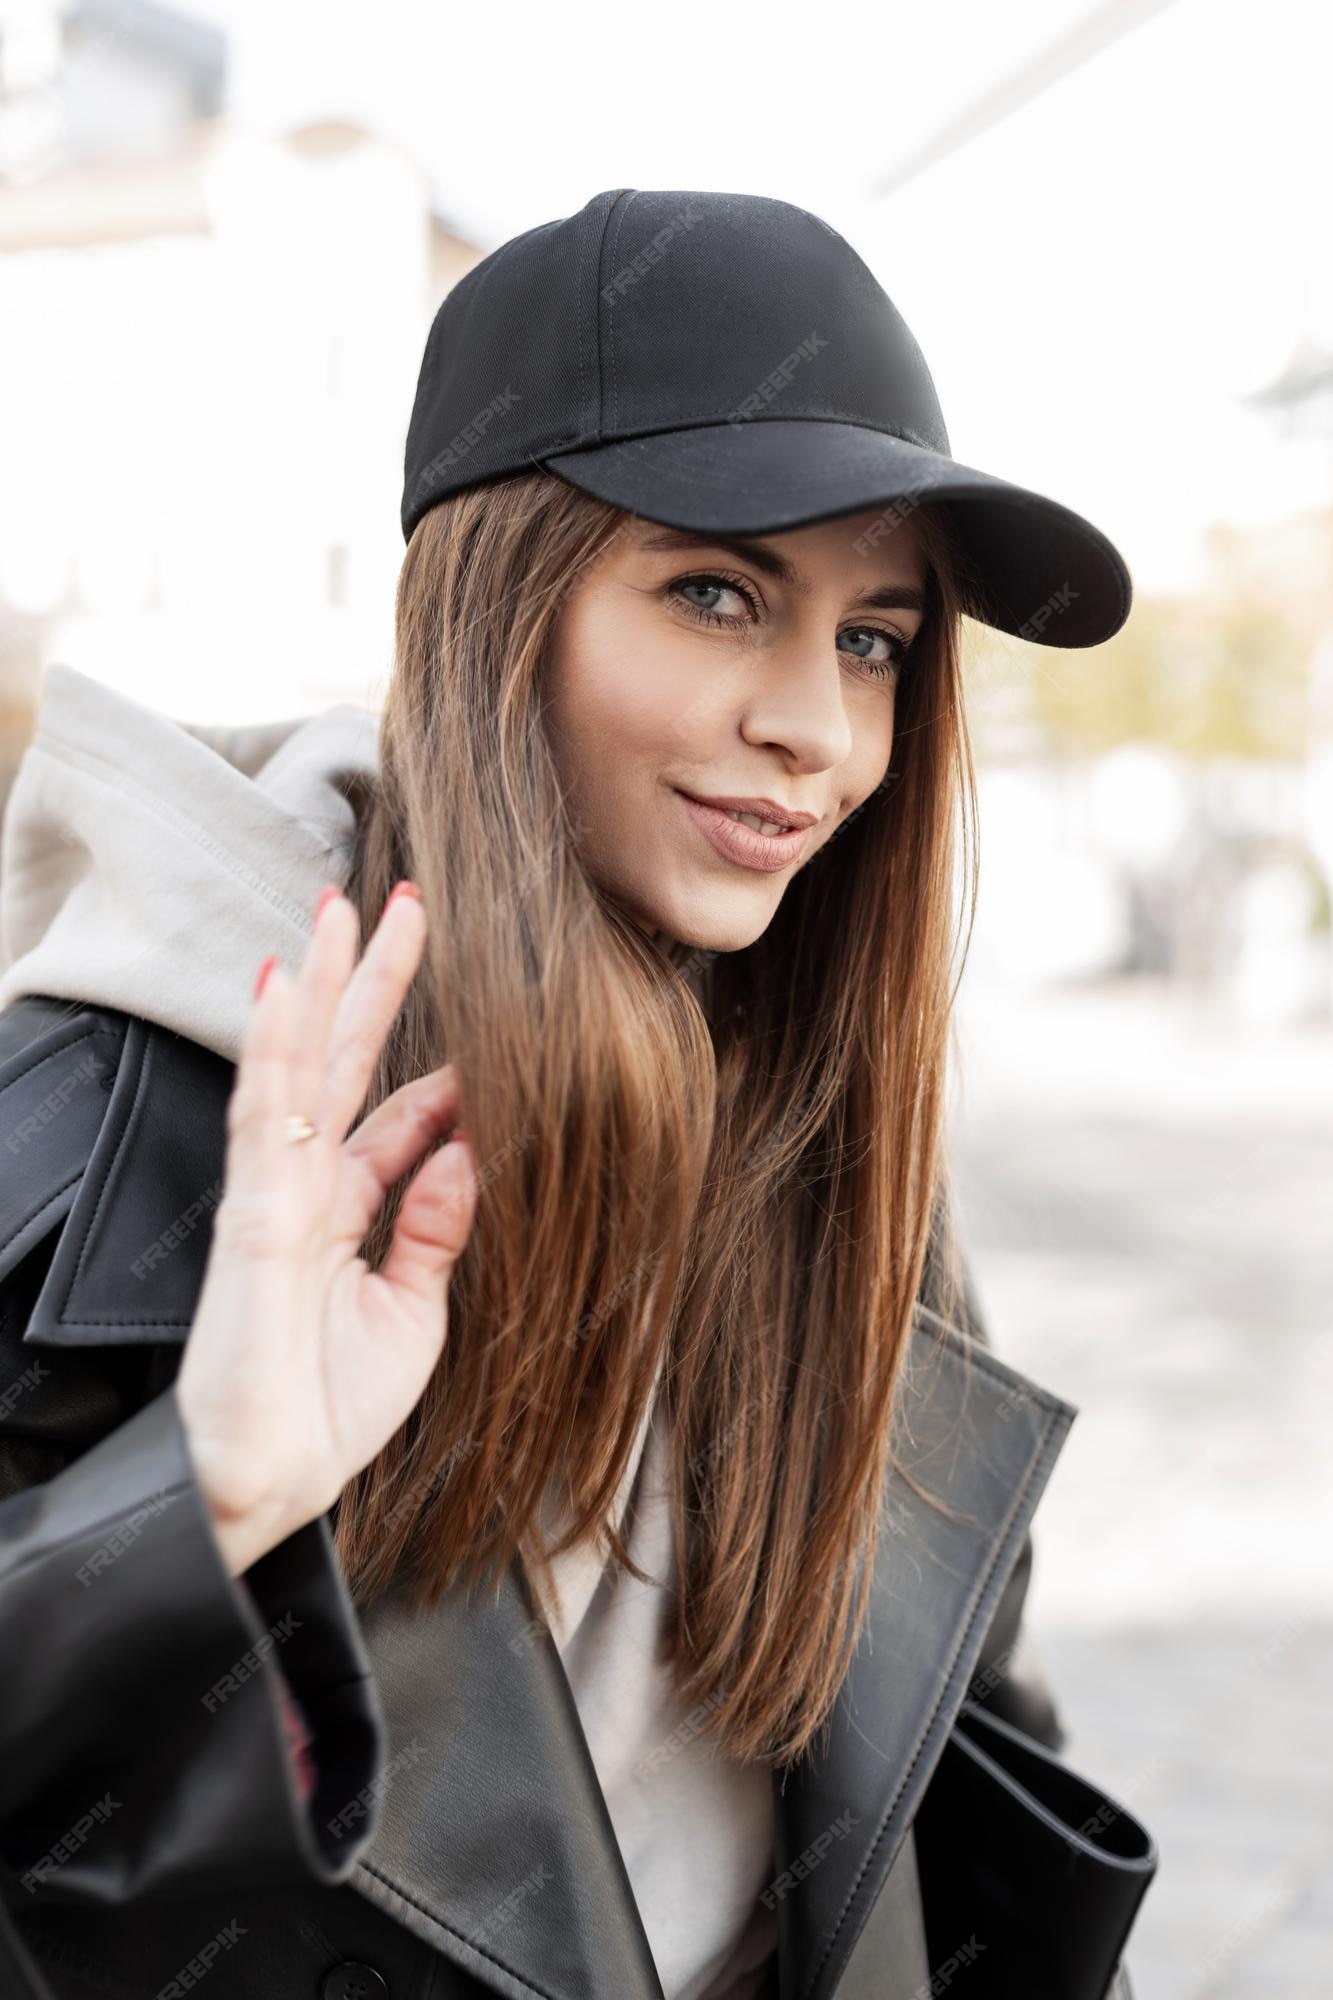 Premium Photo | Happy beautiful young hipster girl with a black mockup cap  in a trendy casual urban outfit with leather jacket and hoodie walking on  the street on a sunny day